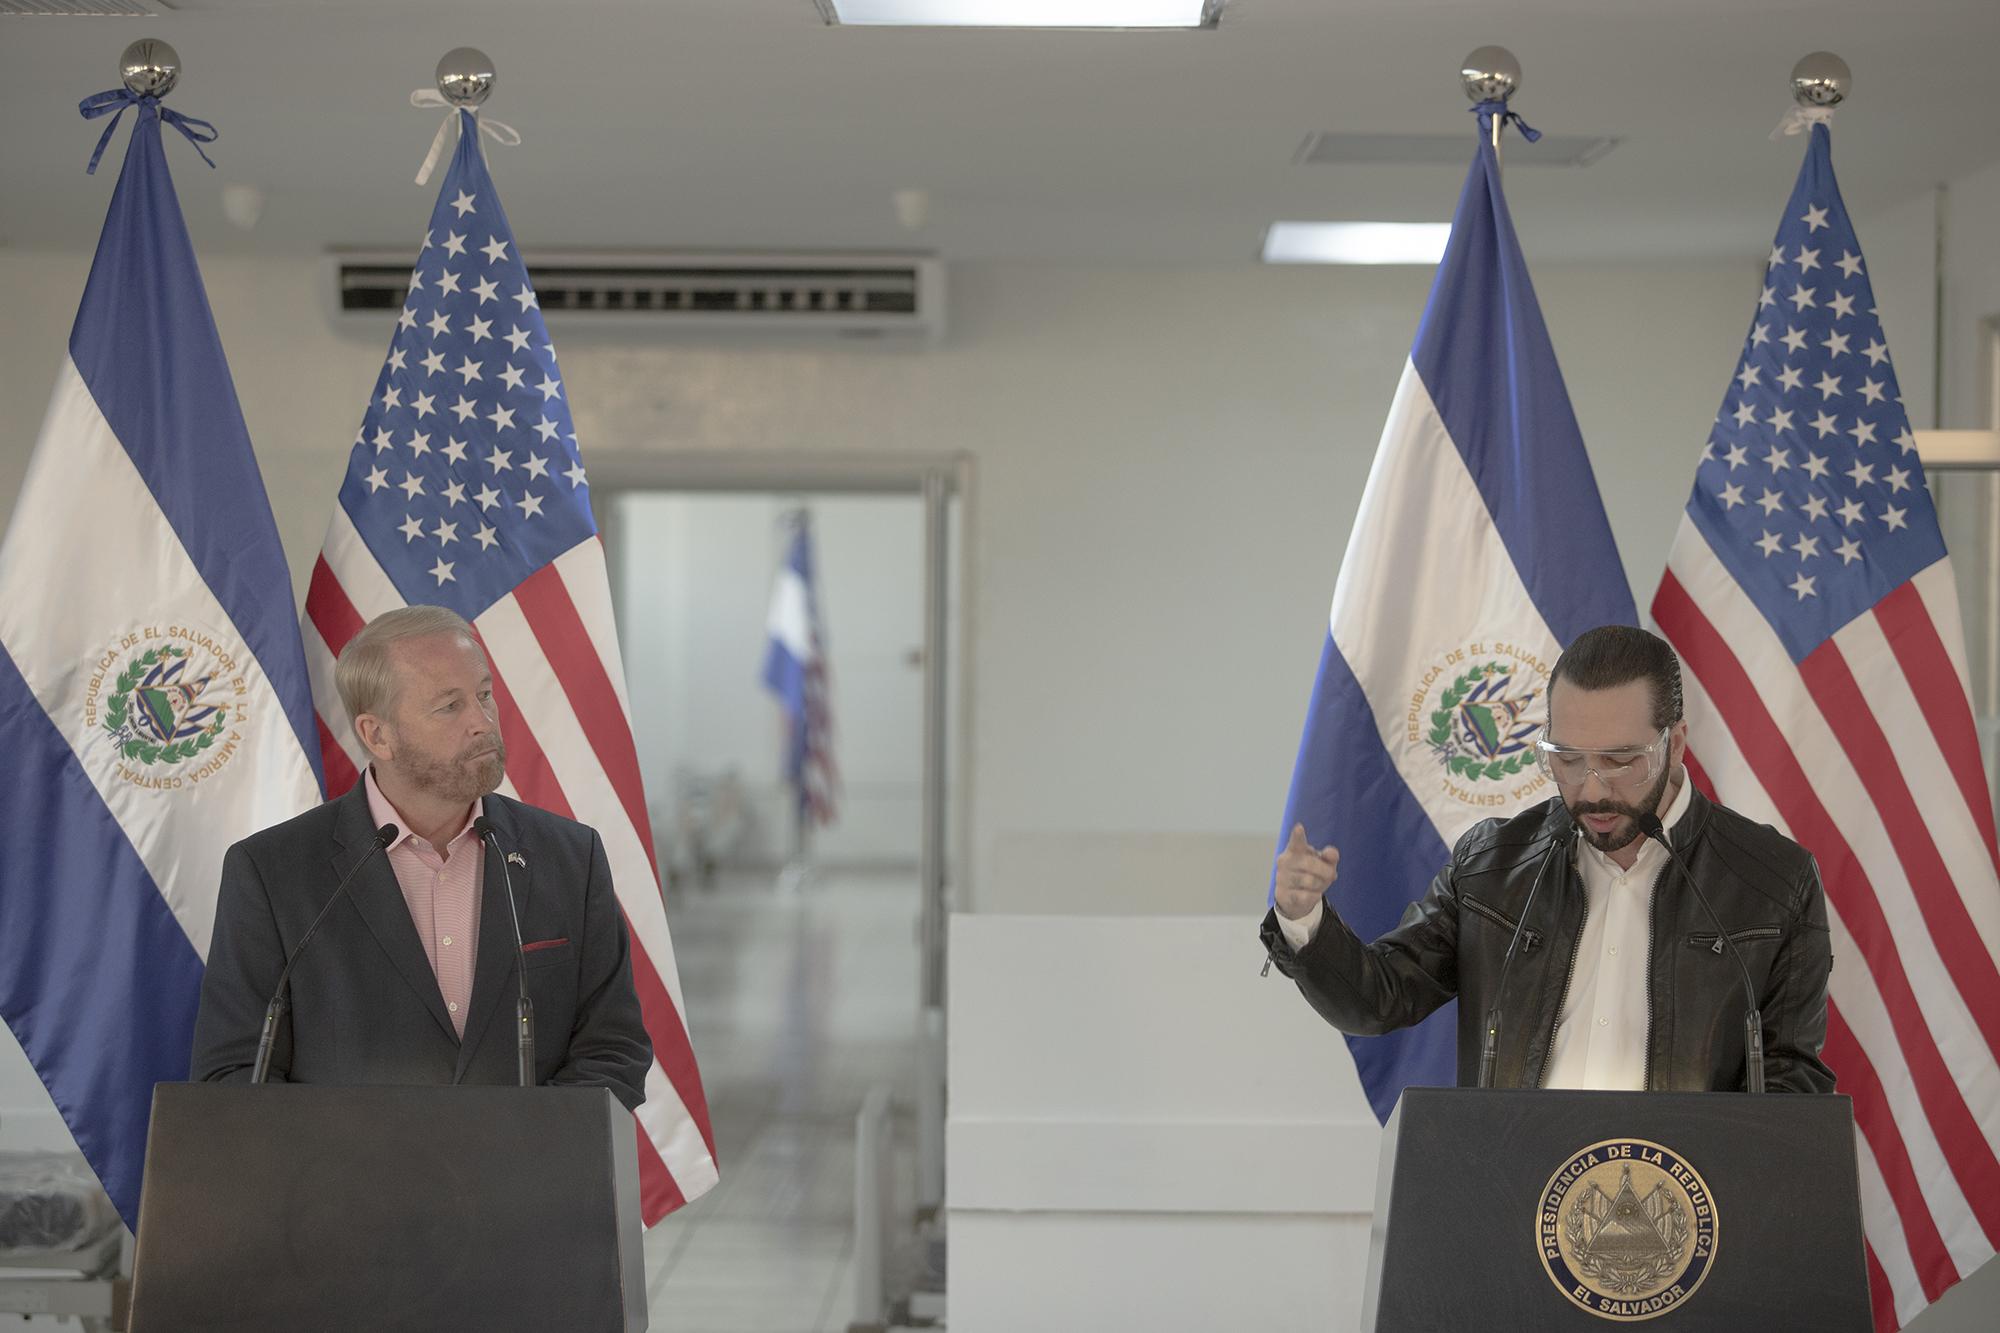 The U.S. ambassador to El Salvador, Ronald Johnson, and the president of El Salvador, Nayib Bukele, speak during a press conference at the Rosales Hospital in San Salvador on May 26, 2020. During the meeting, the Trump administration presented Bukele with a donation of medical equipment to help with El Salvador’s response to the coronavirus crisis. Photo for El Faro: Carlos Barrera.